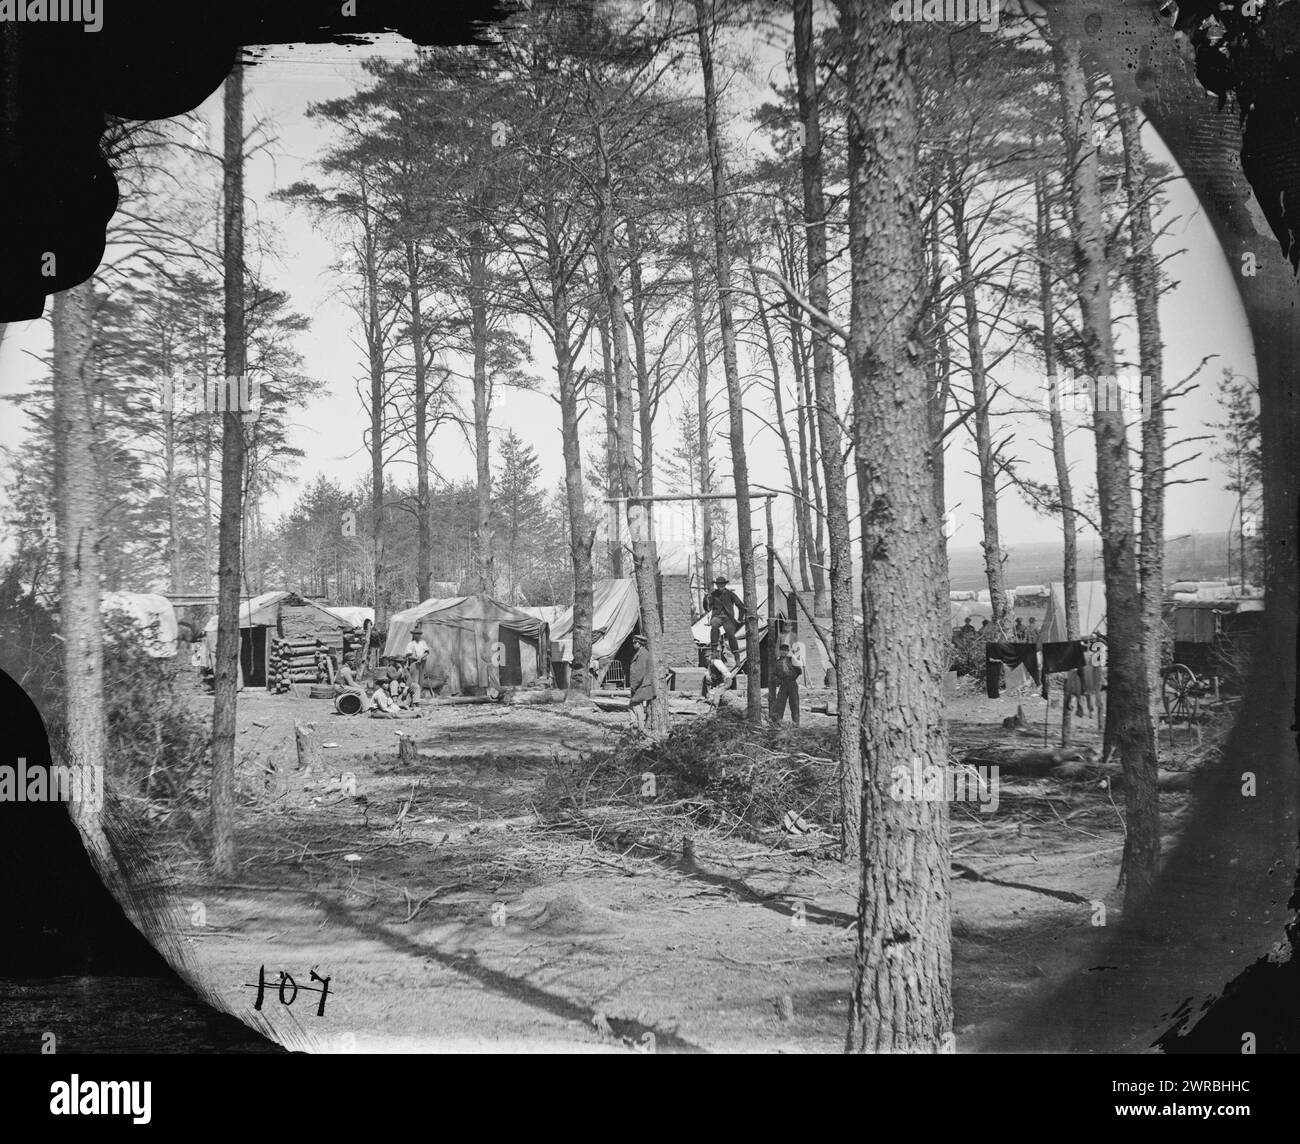 Brandy Station, Va. Winter quarters of telegraphers and photographers, Army of the Potomac headquarters, Photograph from the main eastern theater of war, winter quarters at Brandy Station, December 1863-April 1864., O'Sullivan, Timothy H., 1840-1882, photographer, 1864 April., United States, History, Civil War, 1861-1865, Communications, Glass negatives, 1860-1870, Stereographs, 1860-1870, 1 negative: glass, stereograph, wet collodion, 4 x 10 in Stock Photo